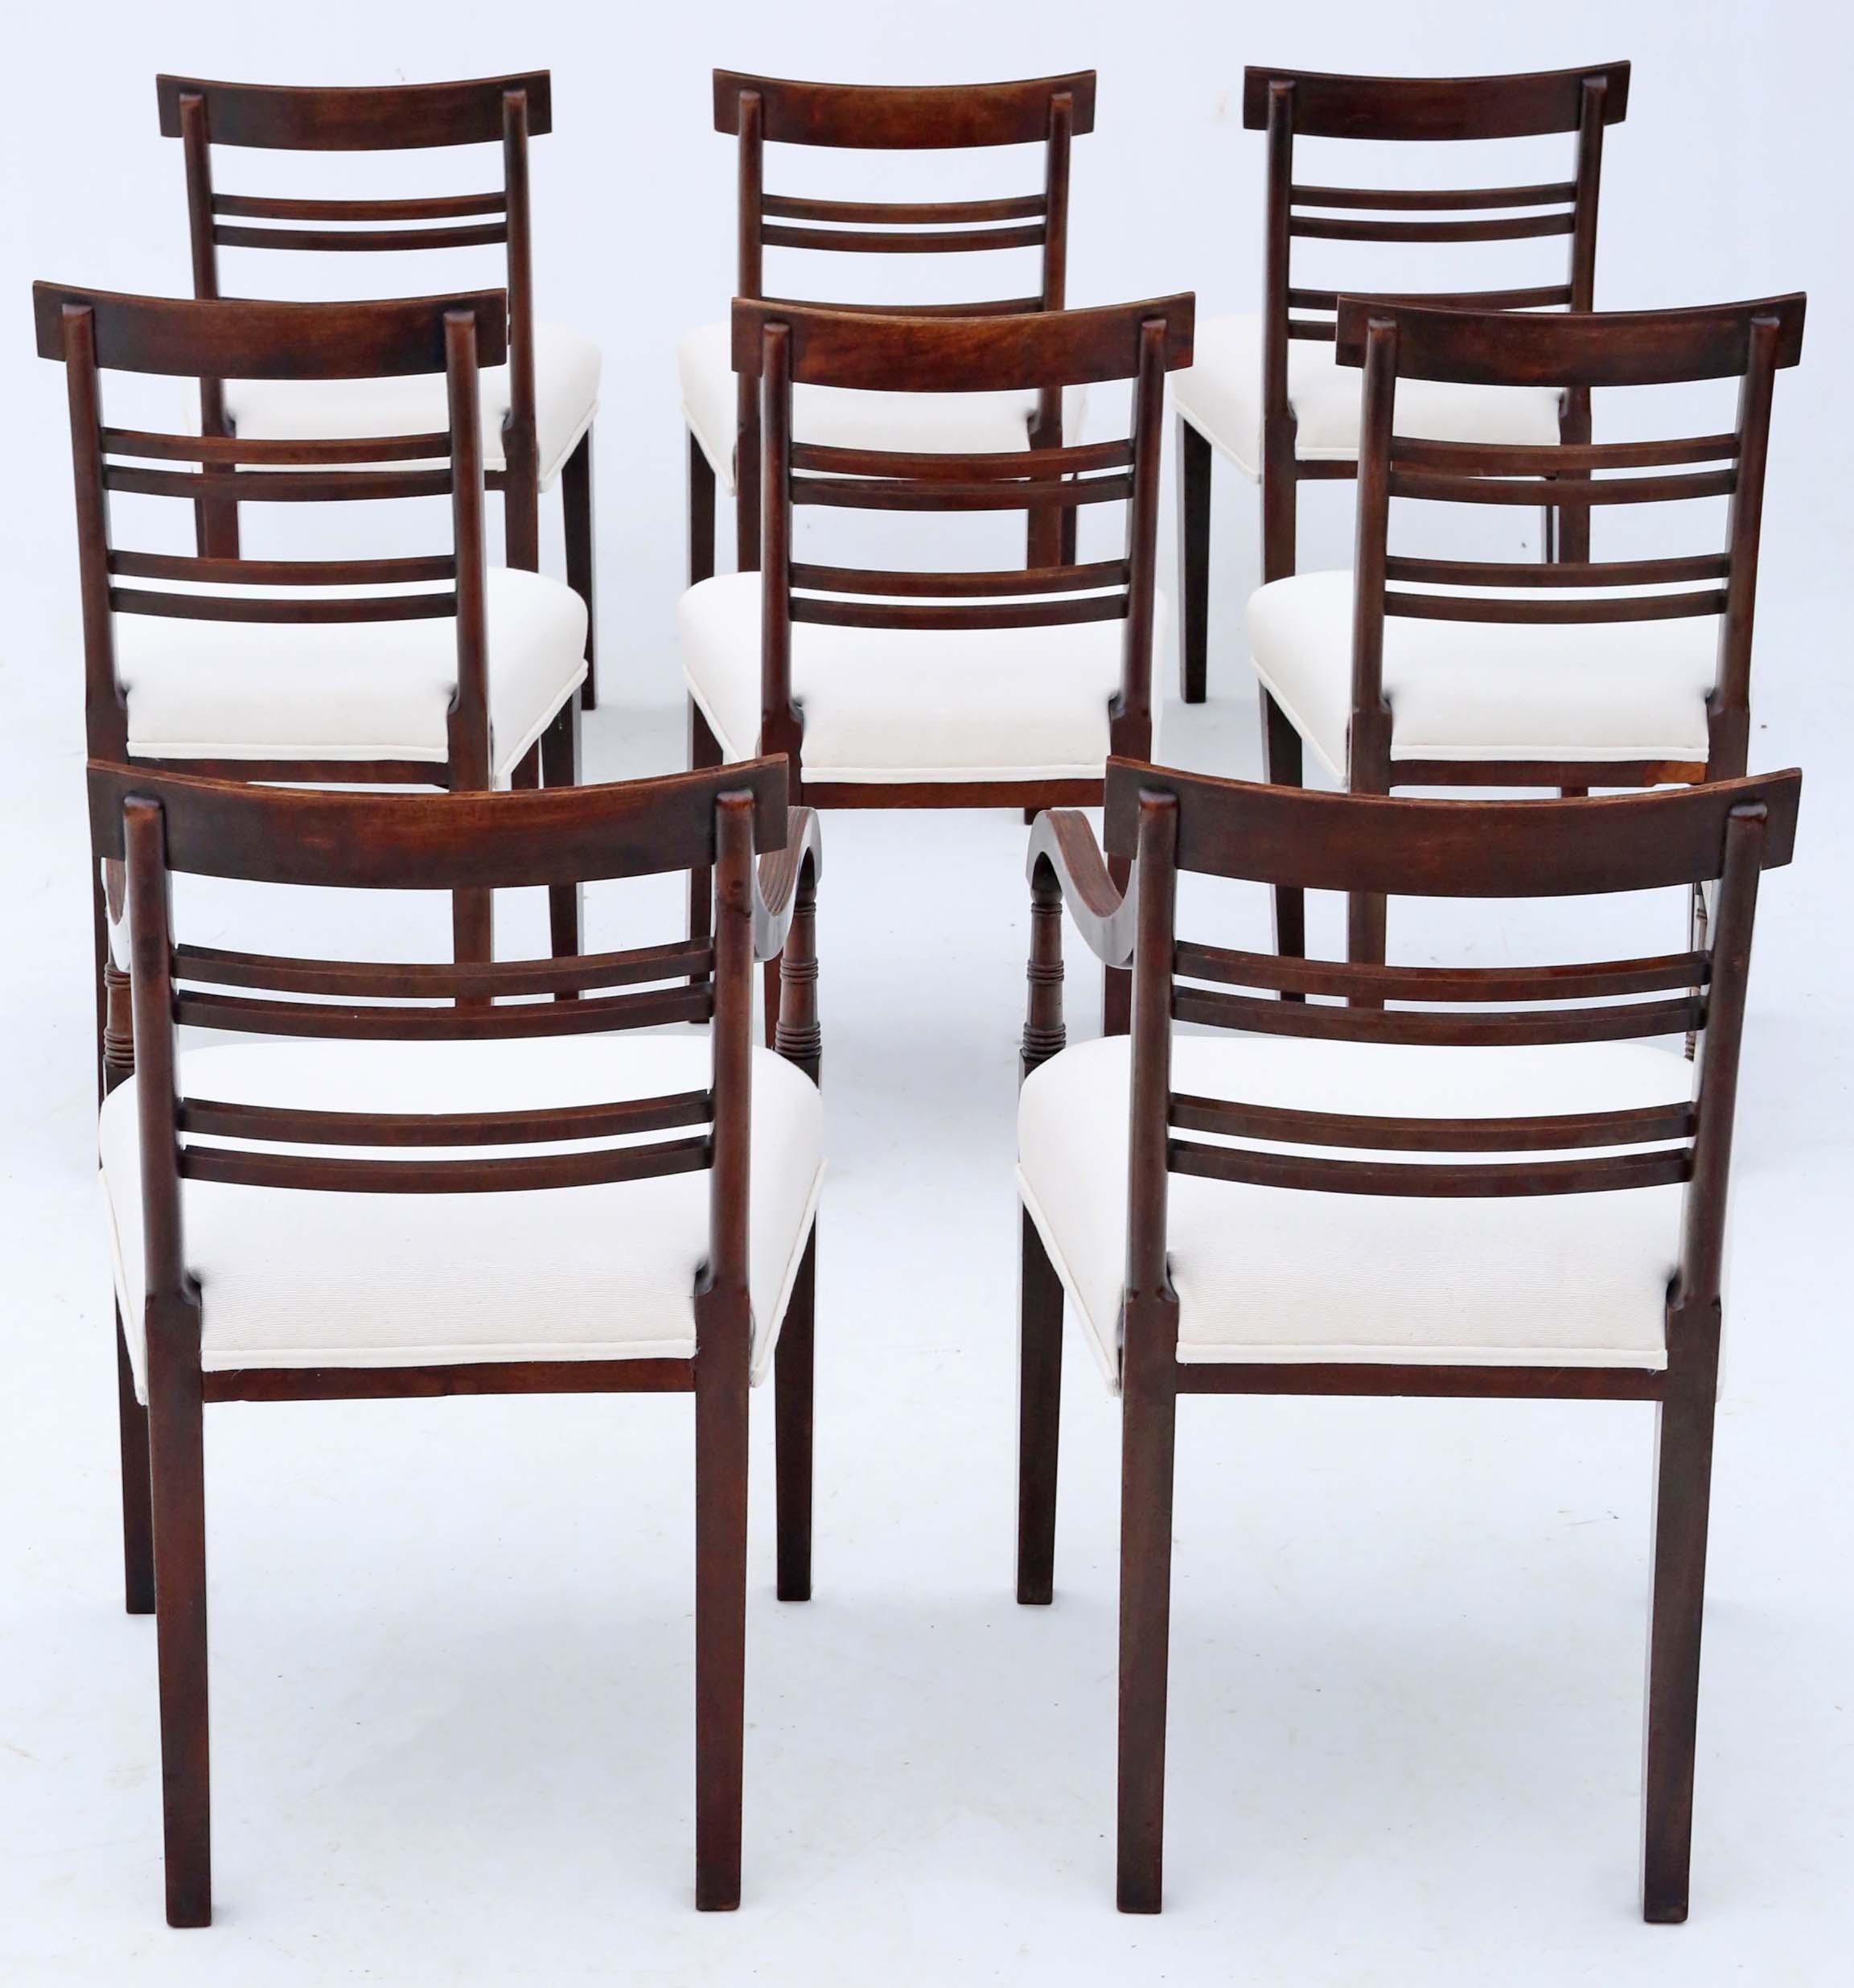 English Early 19th Century Mahogany Dining Chairs: Set of 8 (6+2) Antique Quality, C1810 For Sale